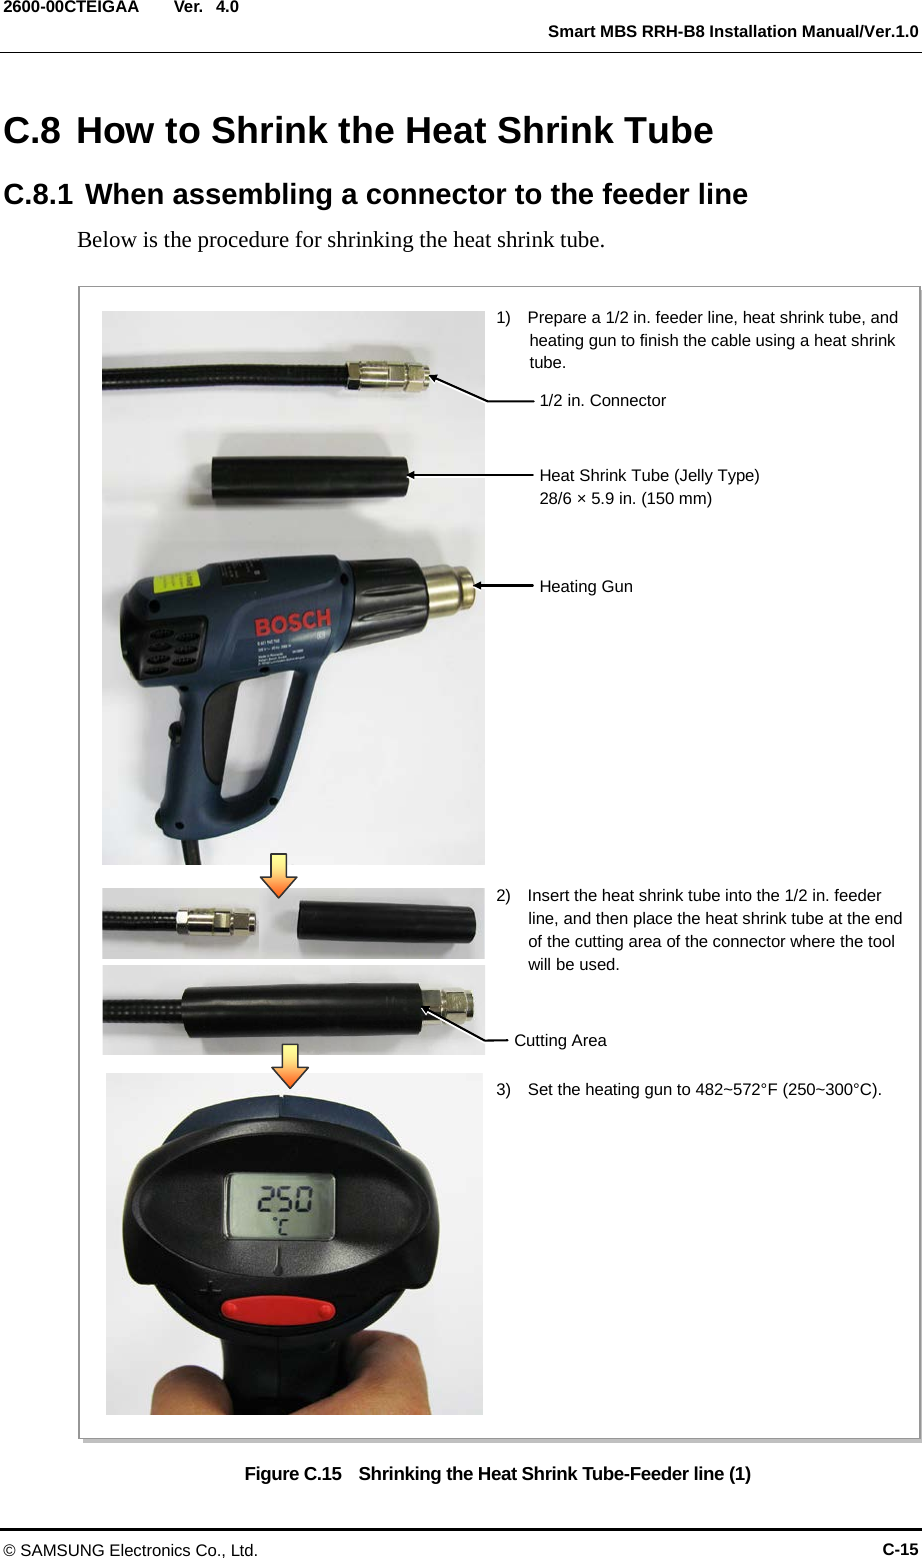  Ver.   Smart MBS RRH-B8 Installation Manual/Ver.1.0 2600-00CTEIGAA 4.0 C.8 How to Shrink the Heat Shrink Tube C.8.1 When assembling a connector to the feeder line Below is the procedure for shrinking the heat shrink tube.  Figure C.15  Shrinking the Heat Shrink Tube-Feeder line (1) 1)    Prepare a 1/2 in. feeder line, heat shrink tube, and heating gun to finish the cable using a heat shrink tube. 2)    Insert the heat shrink tube into the 1/2 in. feeder line, and then place the heat shrink tube at the end of the cutting area of the connector where the tool will be used. 3)    Set the heating gun to 482~572°F (250~300°C). Heat Shrink Tube (Jelly Type) 28/6 × 5.9 in. (150 mm) 1/2 in. Connector Heating Gun  Cutting Area © SAMSUNG Electronics Co., Ltd. C-15 